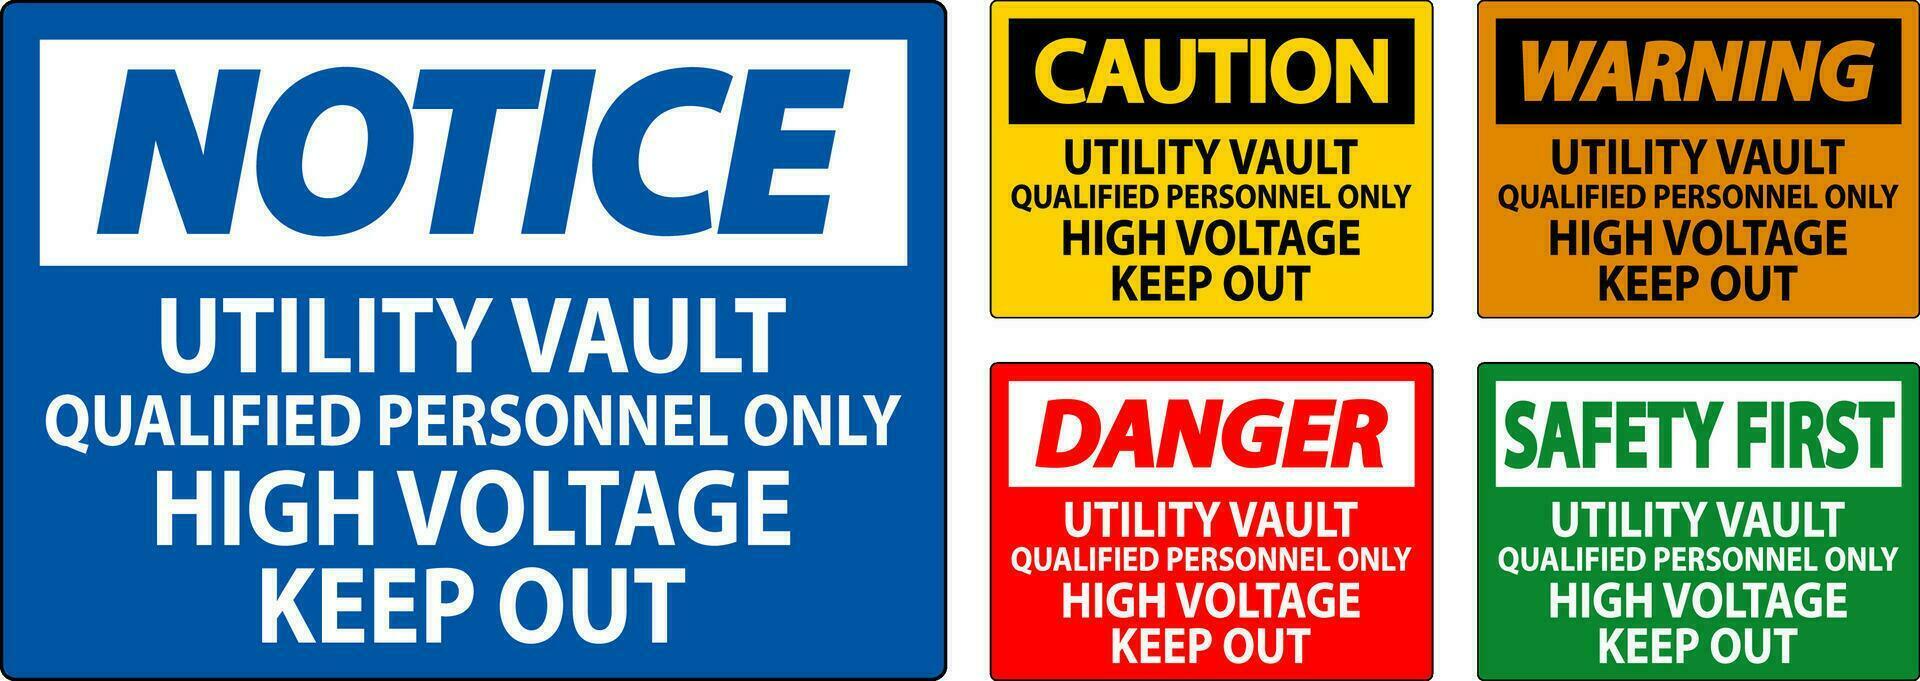 Danger Sign Utility Vault - Qualified Personnel Only, High Voltage Keep Out vector